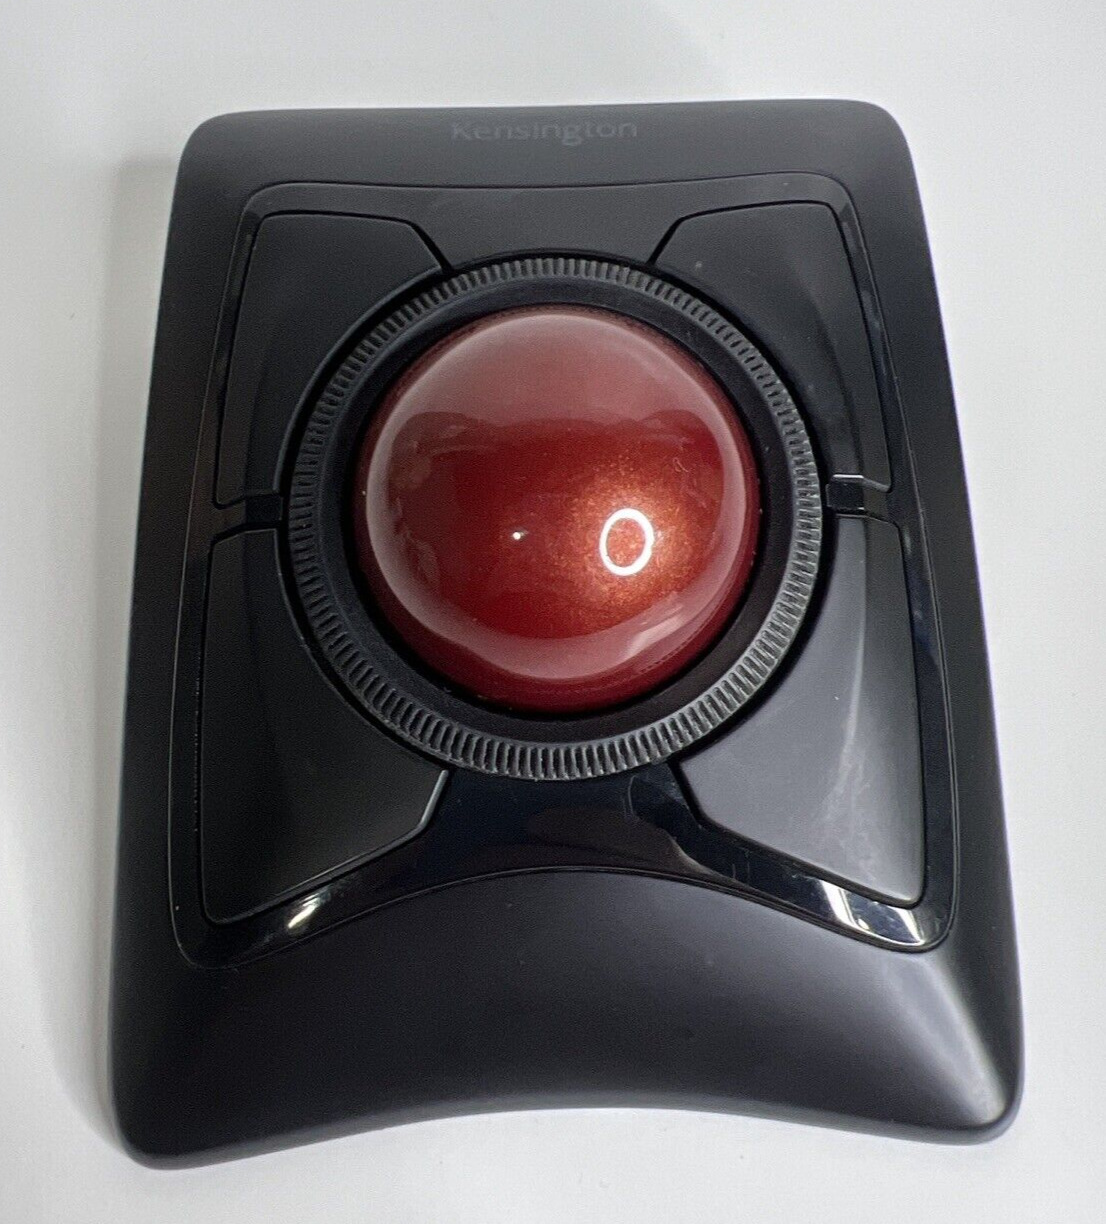 Kensington Expert Mouse Wireless Trackball  (K72359) M01286-M TESTED NO DONGLE